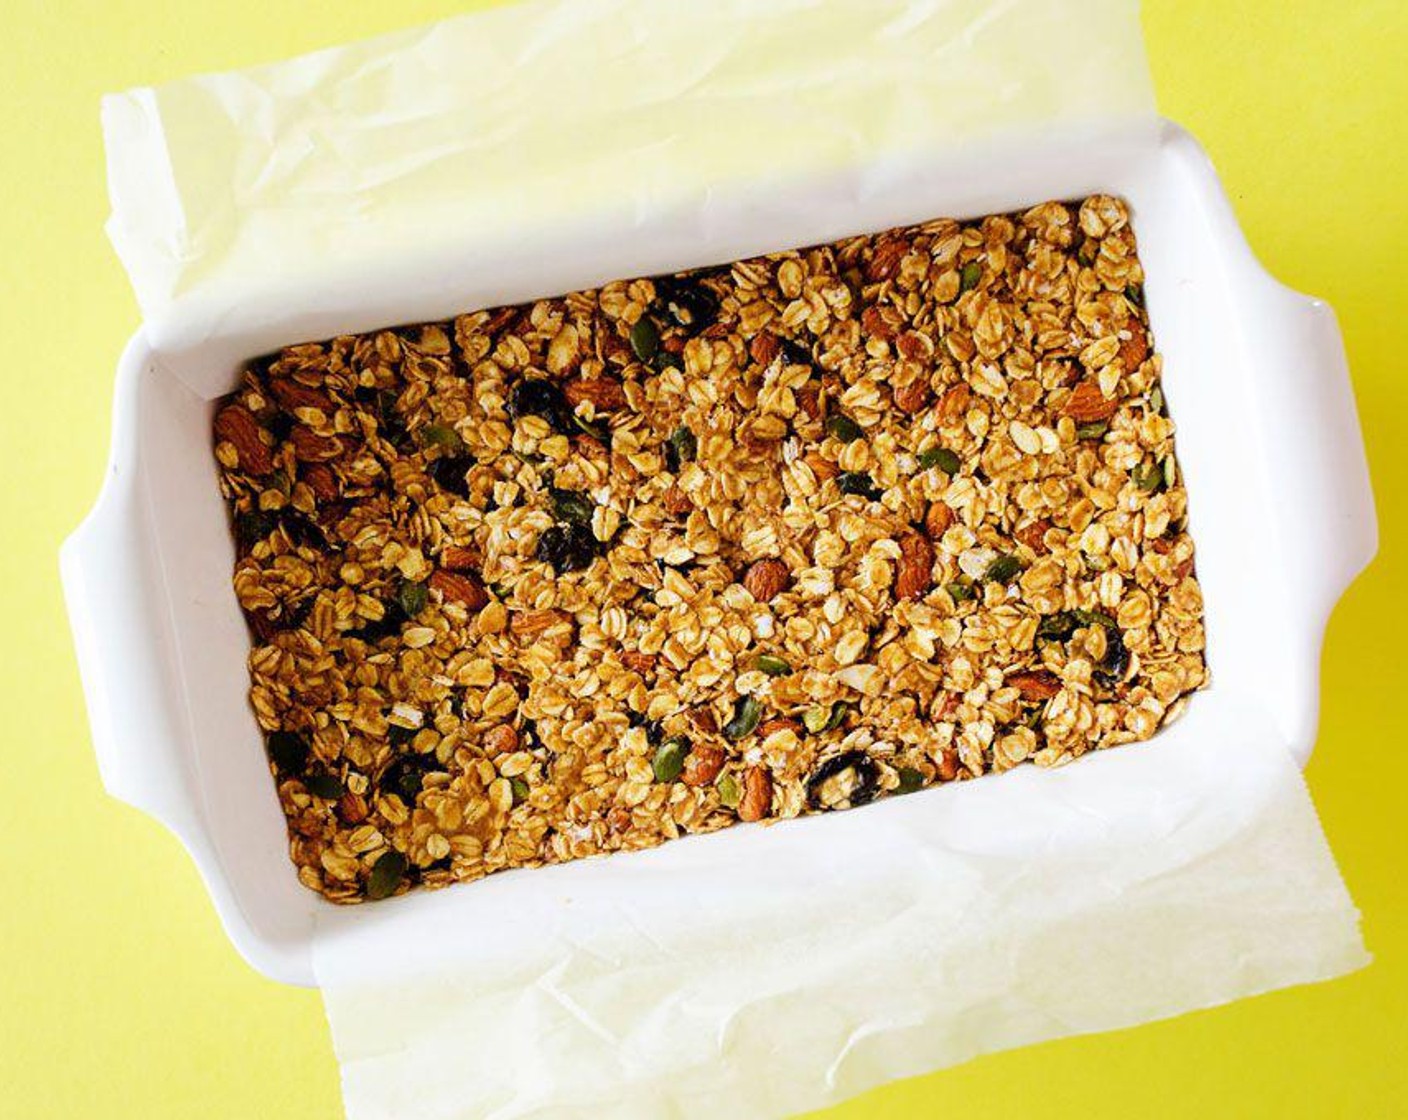 step 5 Pop granola in the freezer for 15 to 30 minutes to firm up, then cut into 9 to 12 bars.